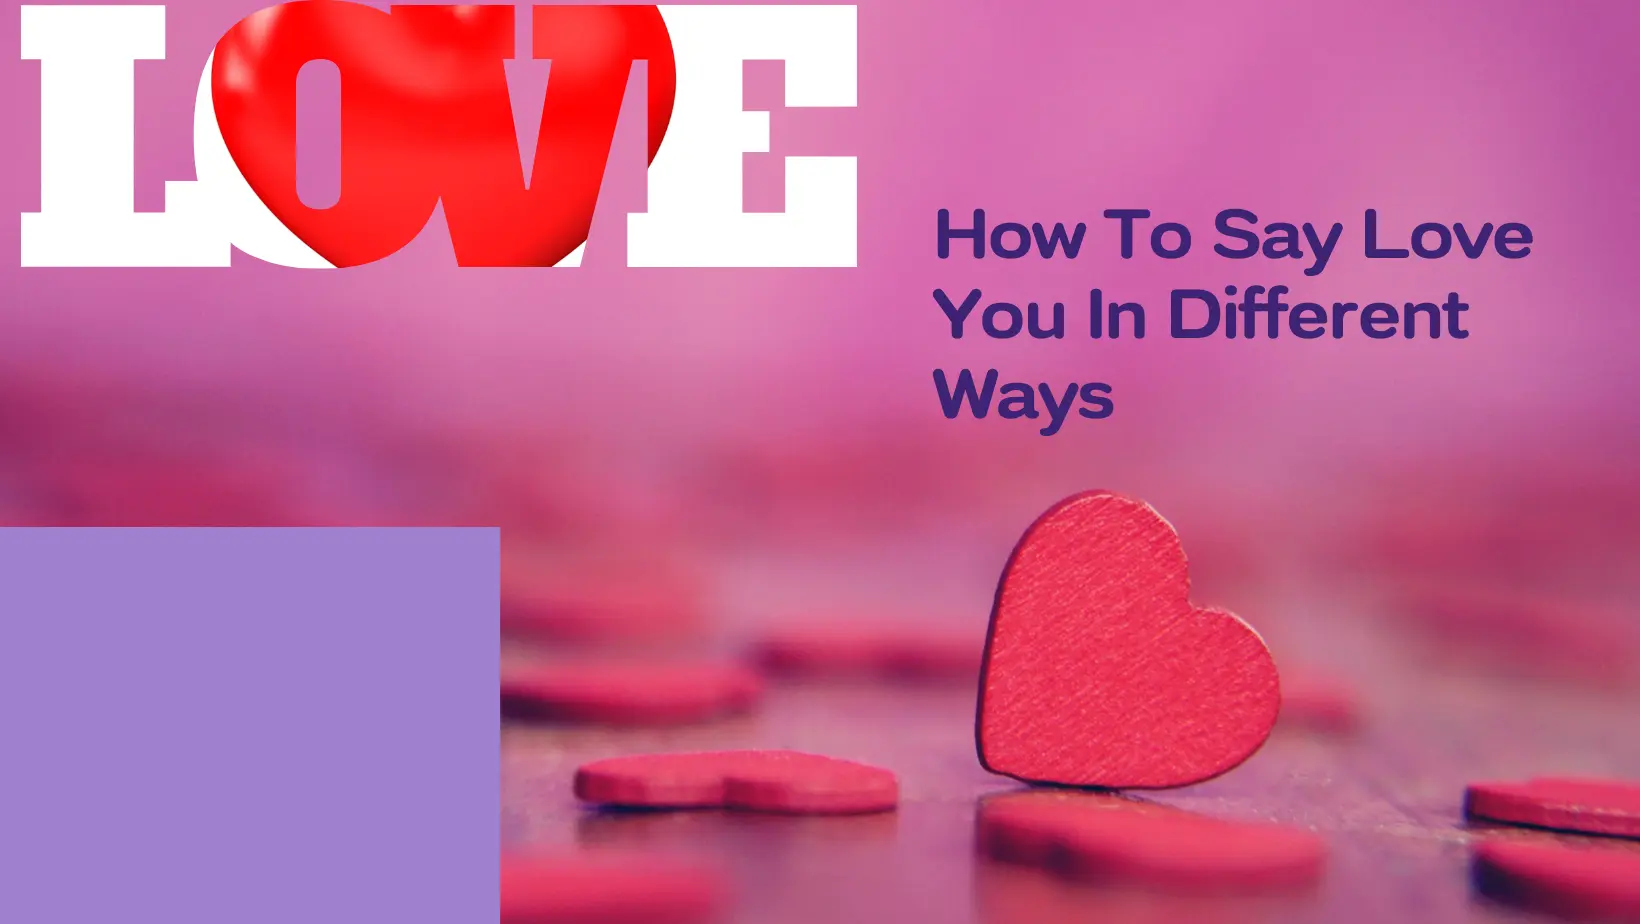 How To Say Love You In Different Ways